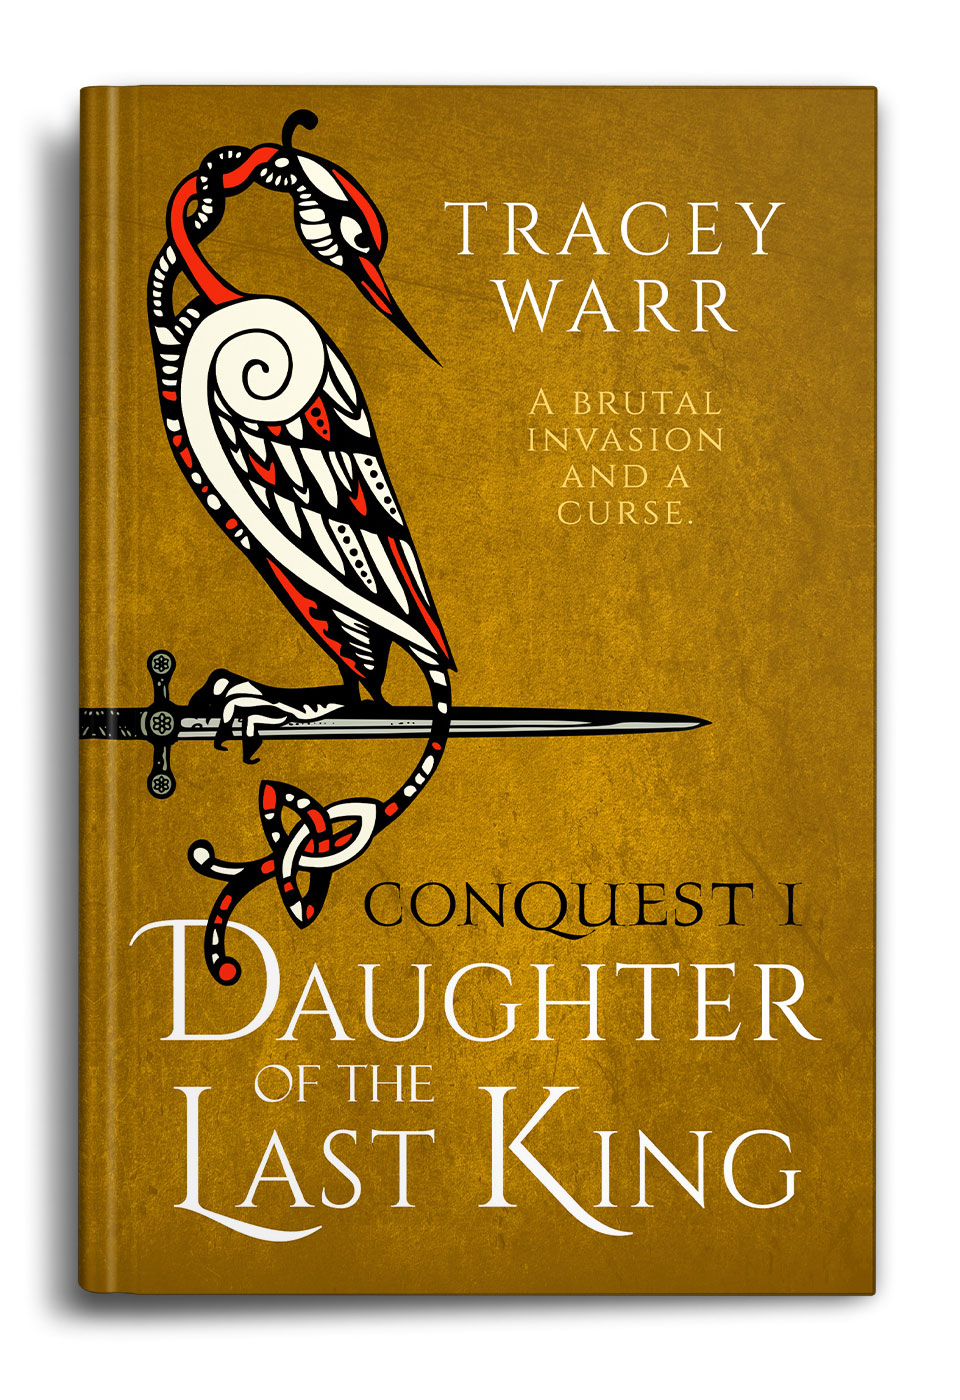 Daughter-of-the-Last-King-by-Tracey-Warr